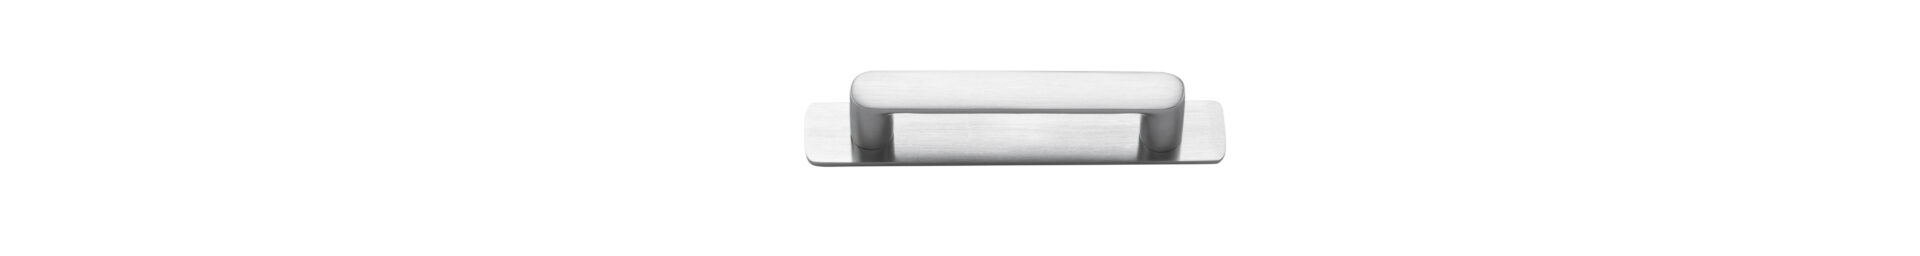 20945B - Osaka Cabinet Pull with Backplate - CTC96mm - Brushed Chrome